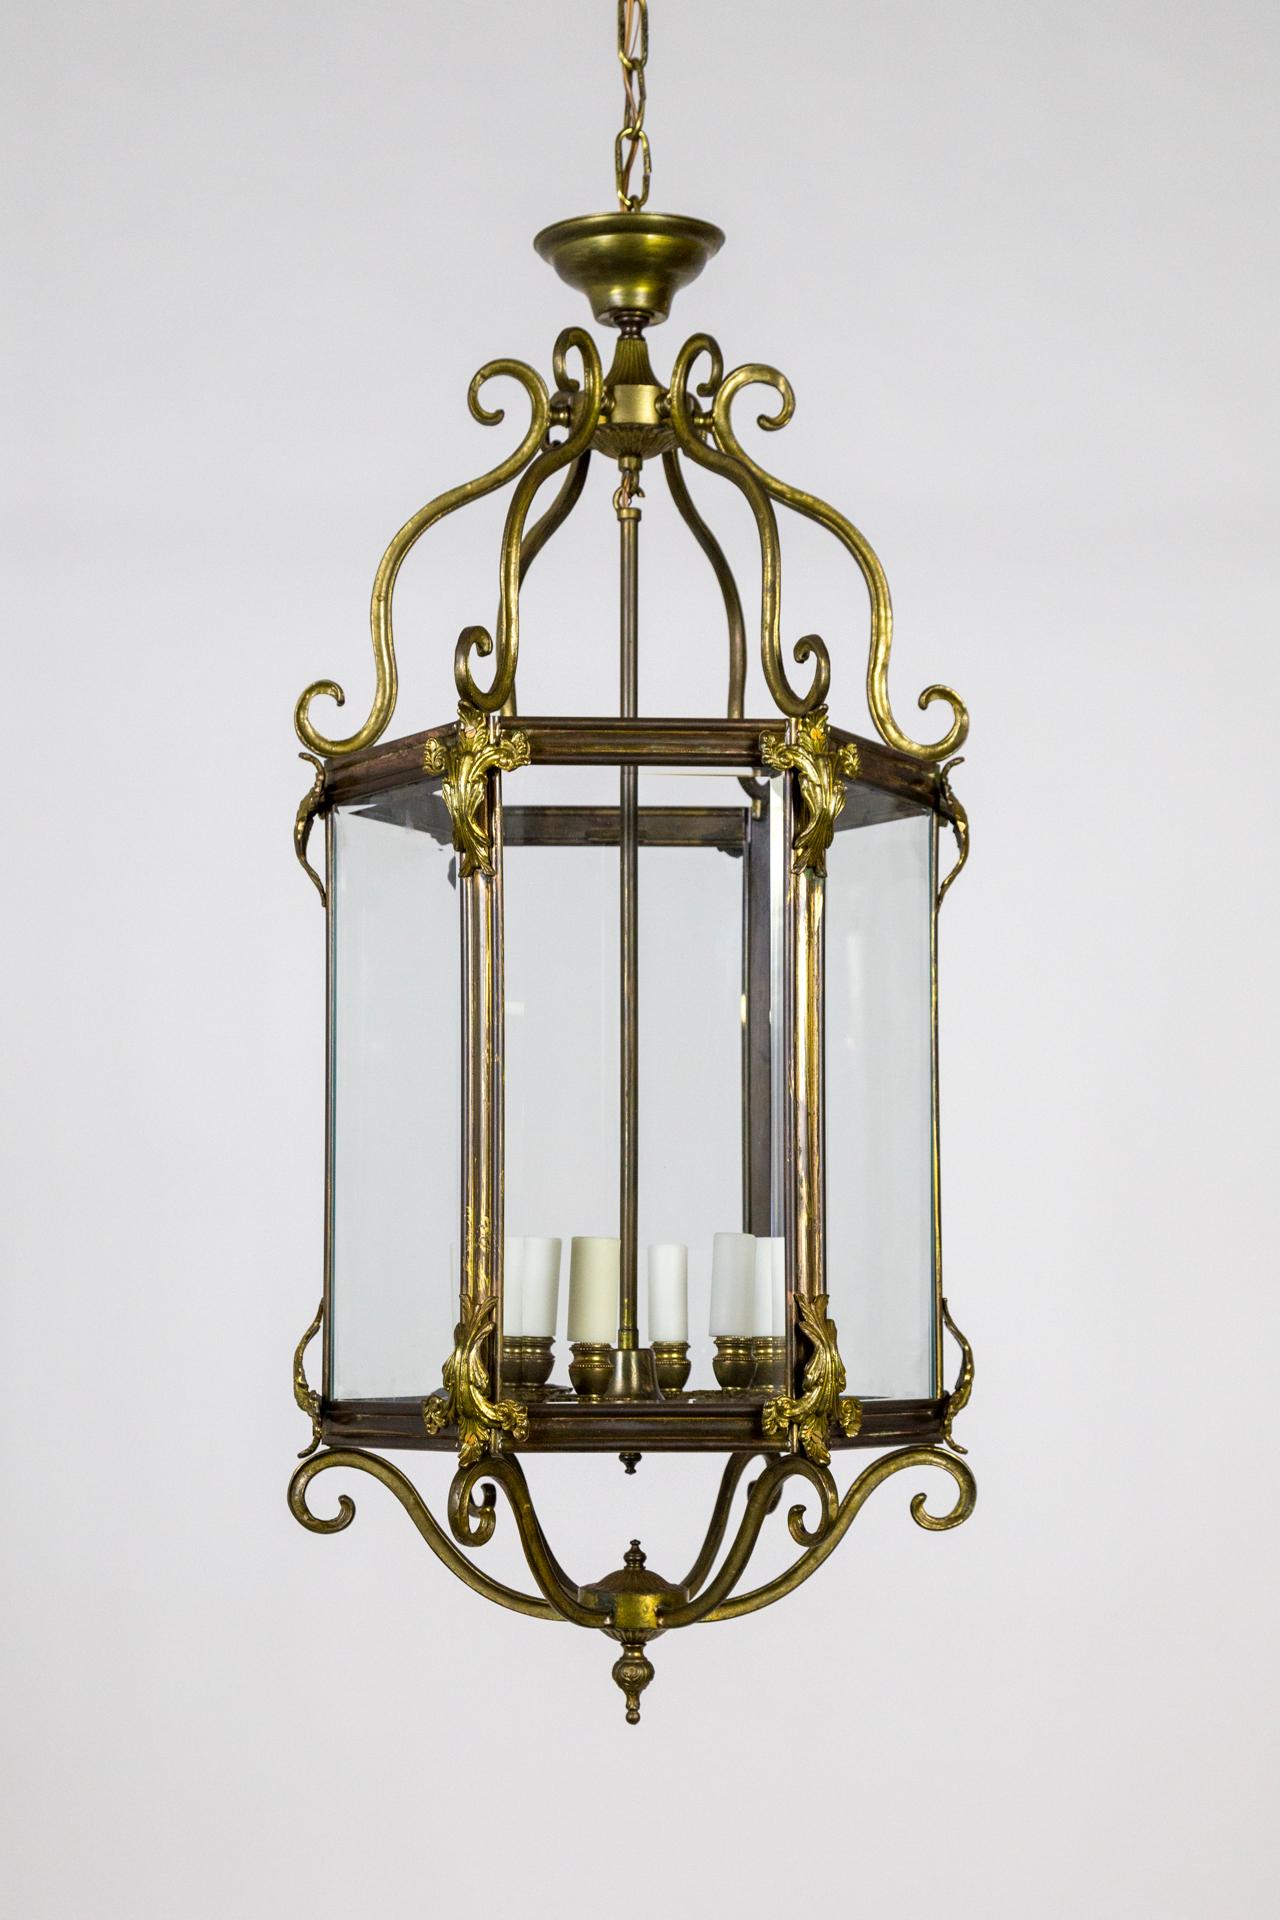 A large, brass lantern with six, beveled glass panels with scrolls at the bottom and top. The finish has a beautiful bronze tone with acanthus leaf accents and floral bobeches; 6 lights. 73